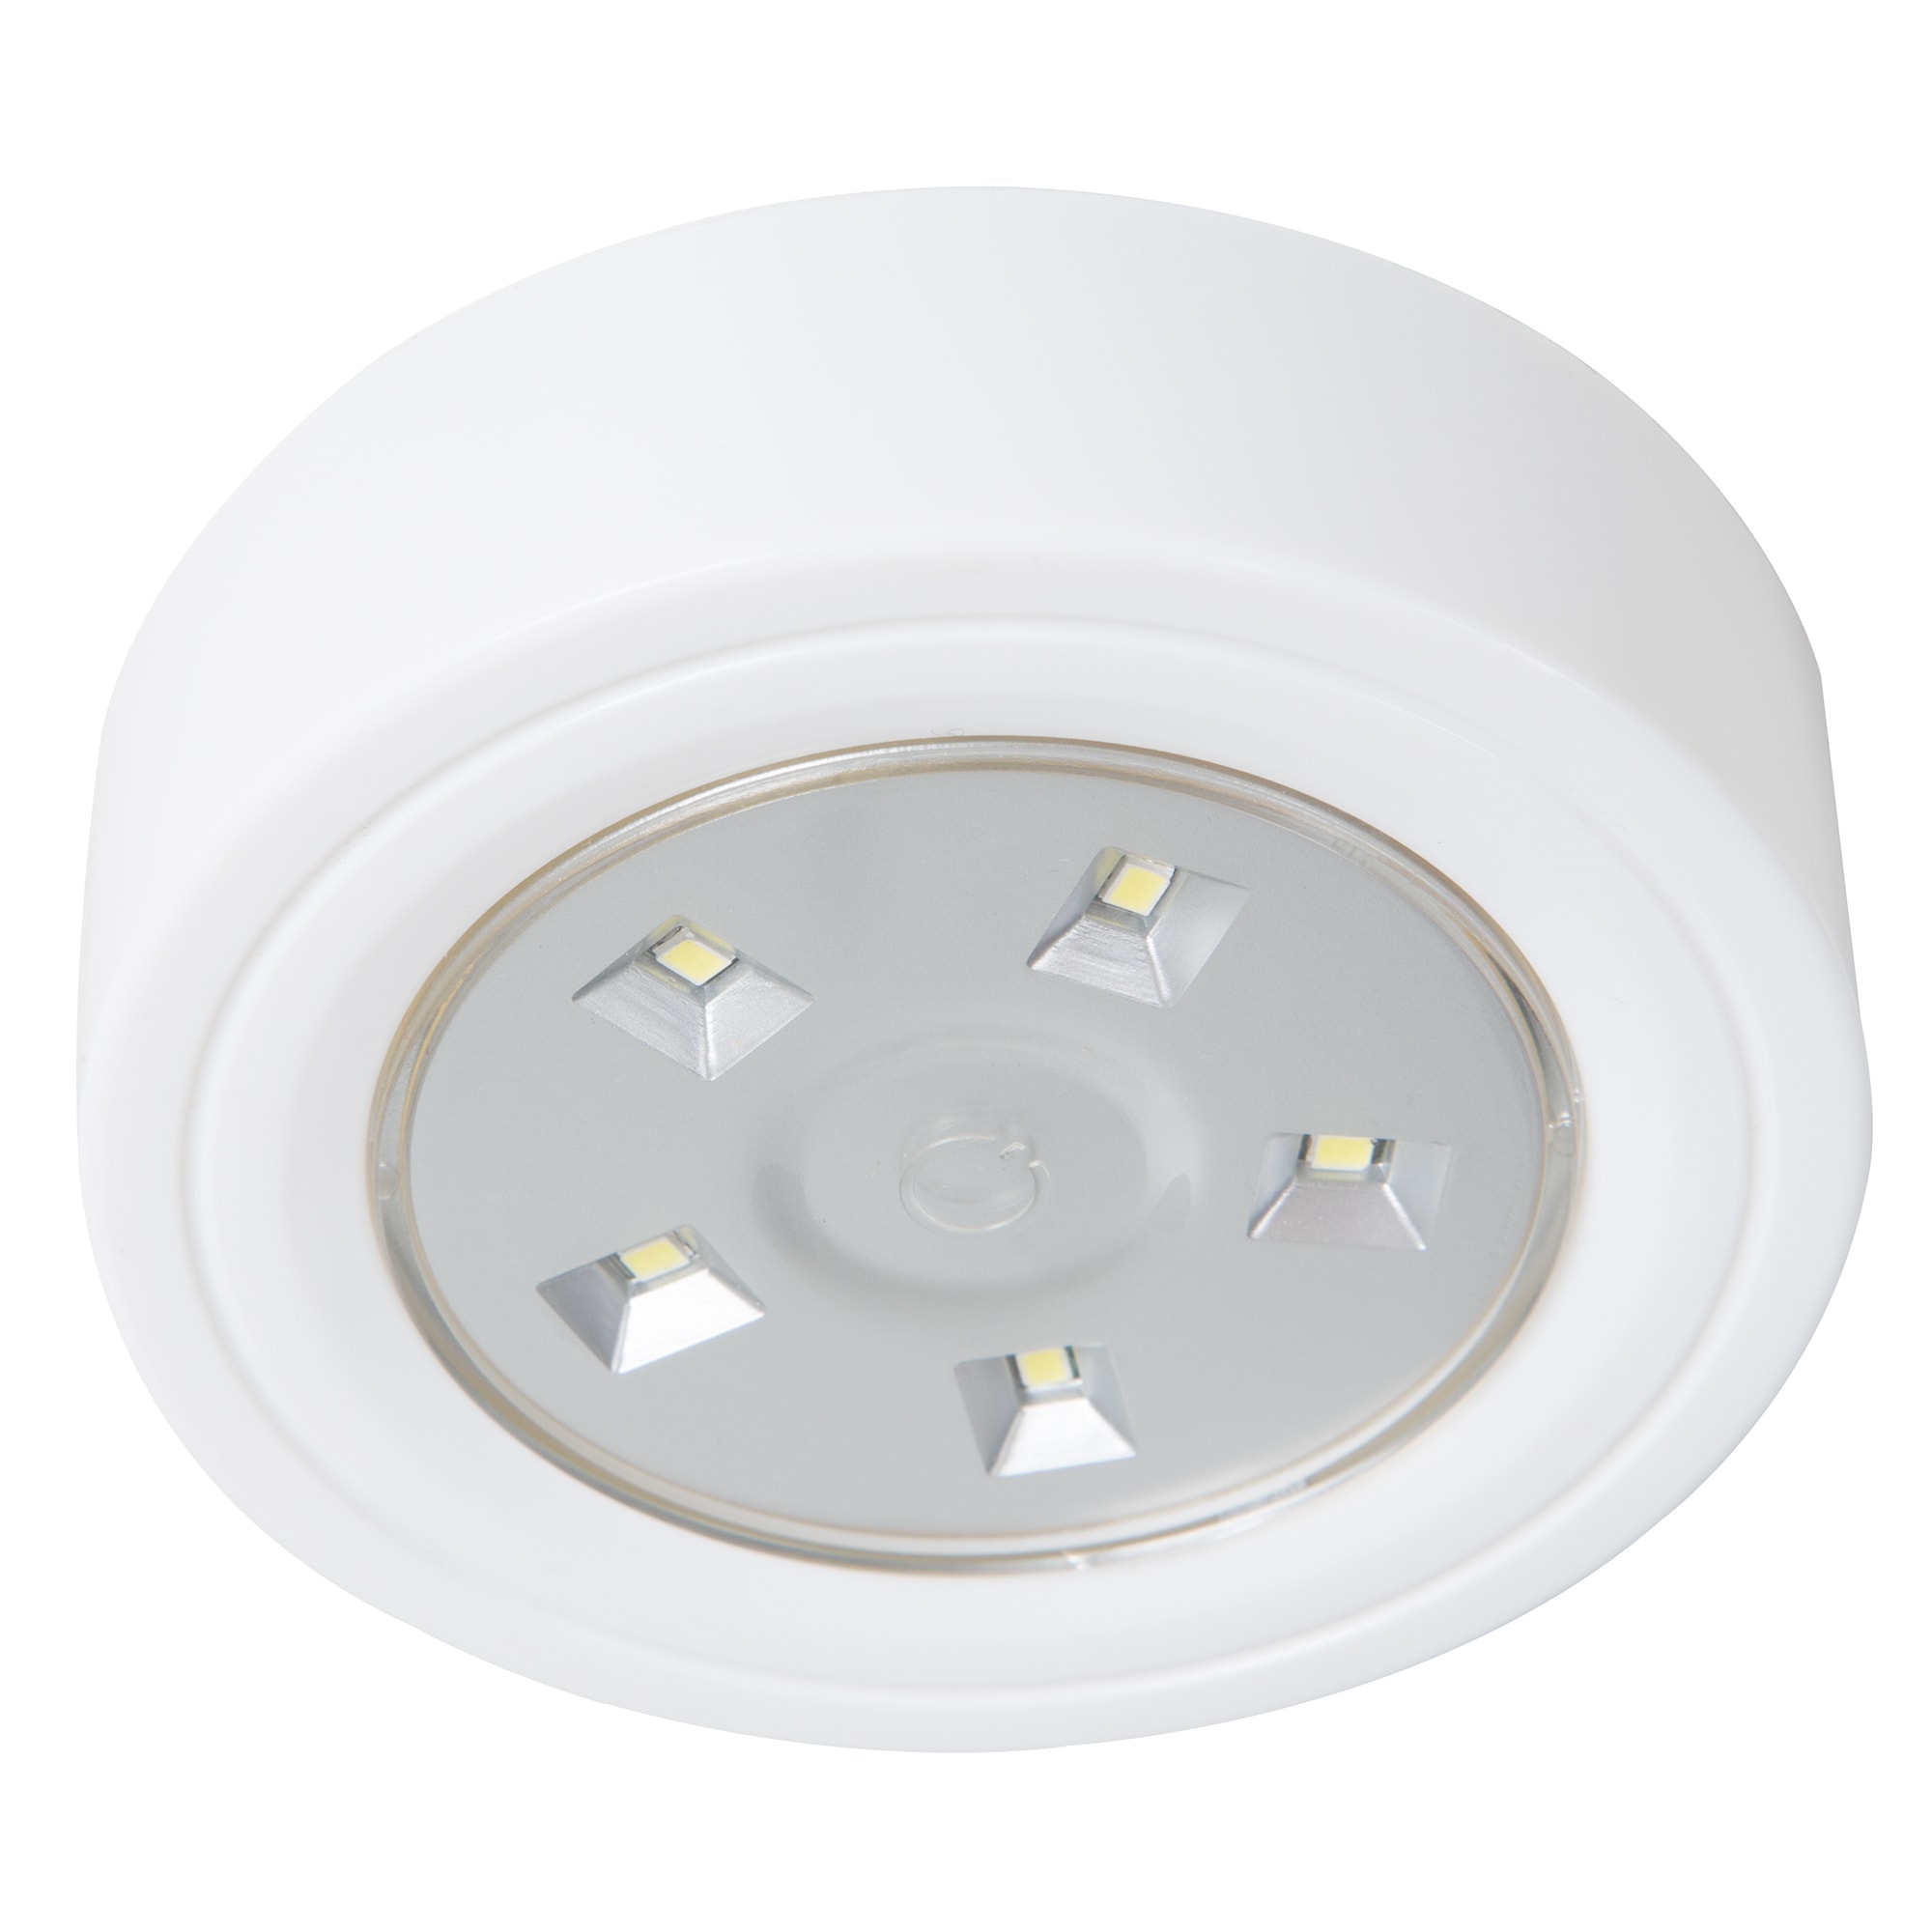 Shop Lavish Home 5 Led Portable Puck And Ceiling Light With Remote